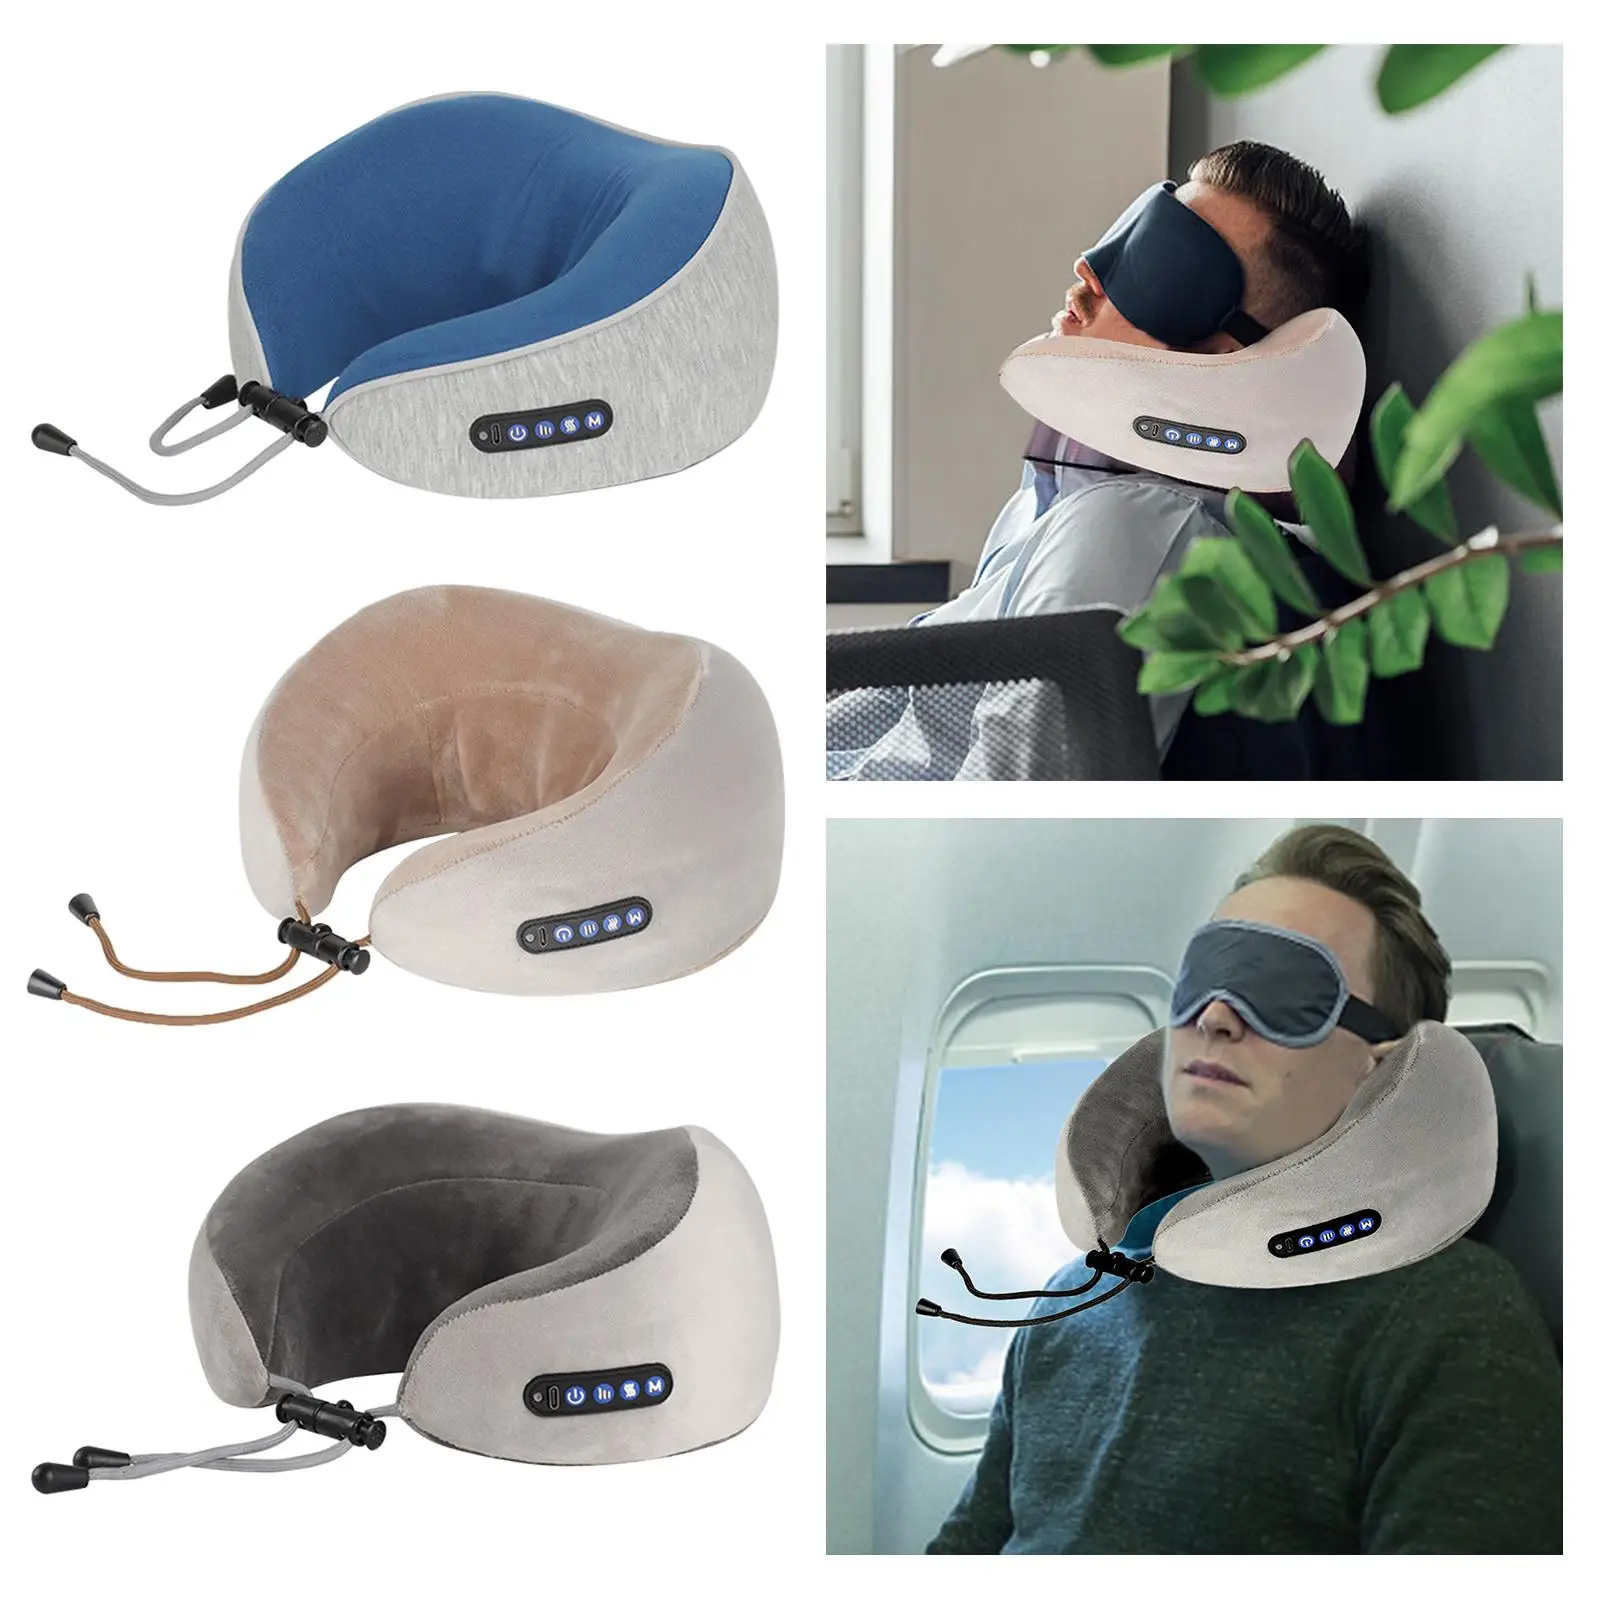 Cervical Neck Massager Pillow Multifunction Portable Adjustable Kneading Vibration U style Travel Pillow for Cars Watching TV